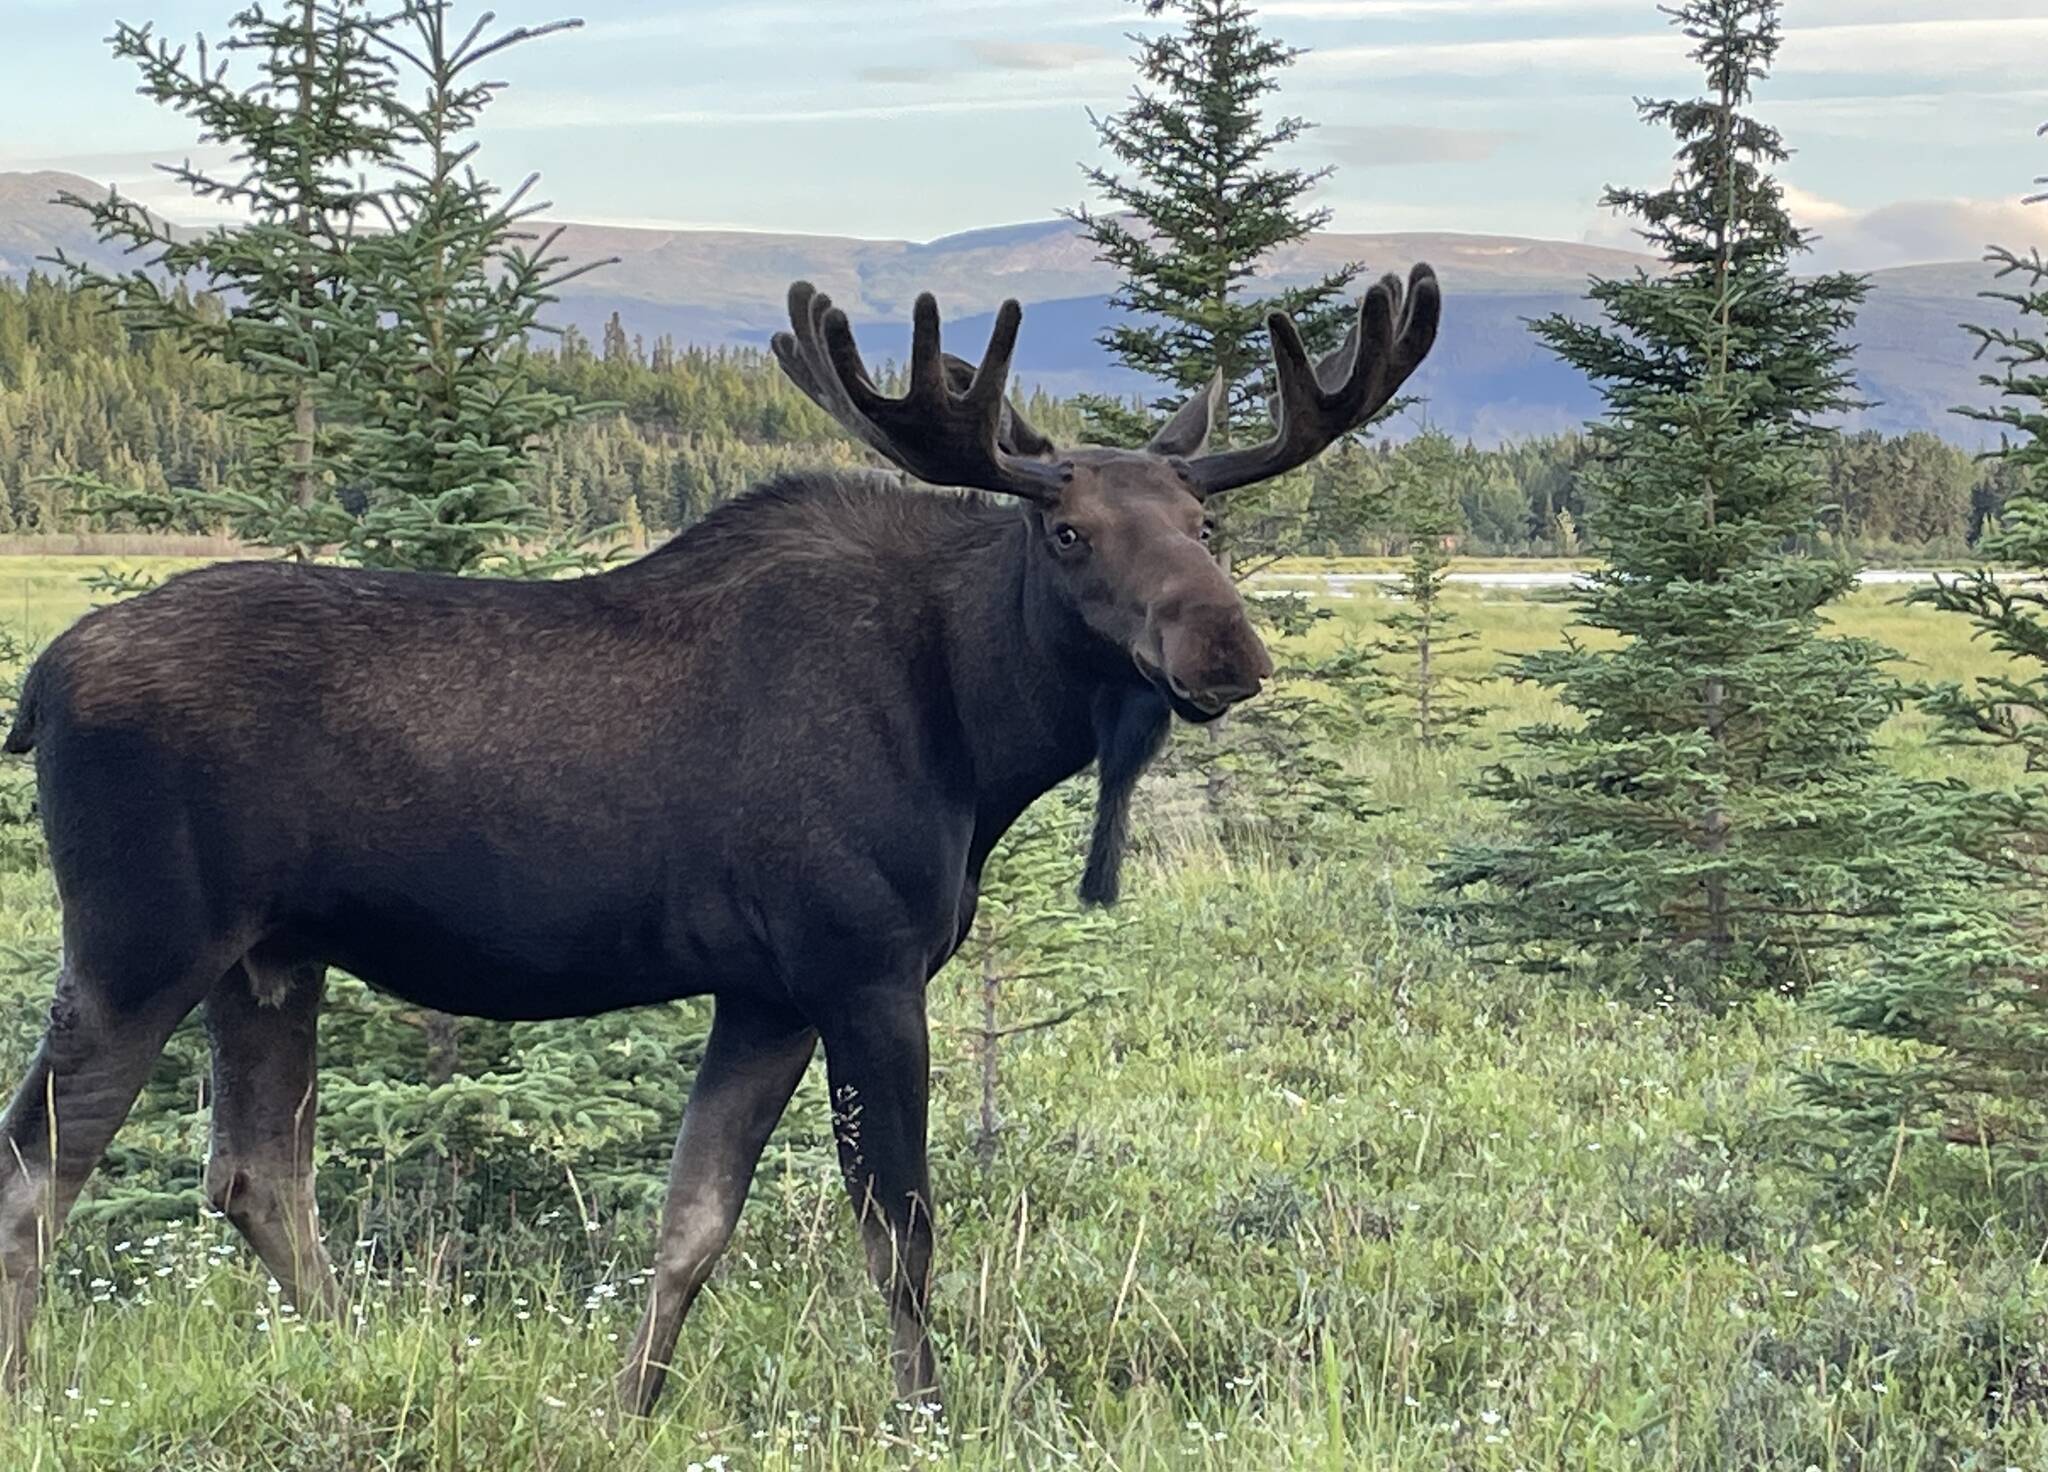 A bull moose looks at a photographer near Whitehorse, Yukon, in summer 2022. (Courtesy Photo / Ned Rozell)